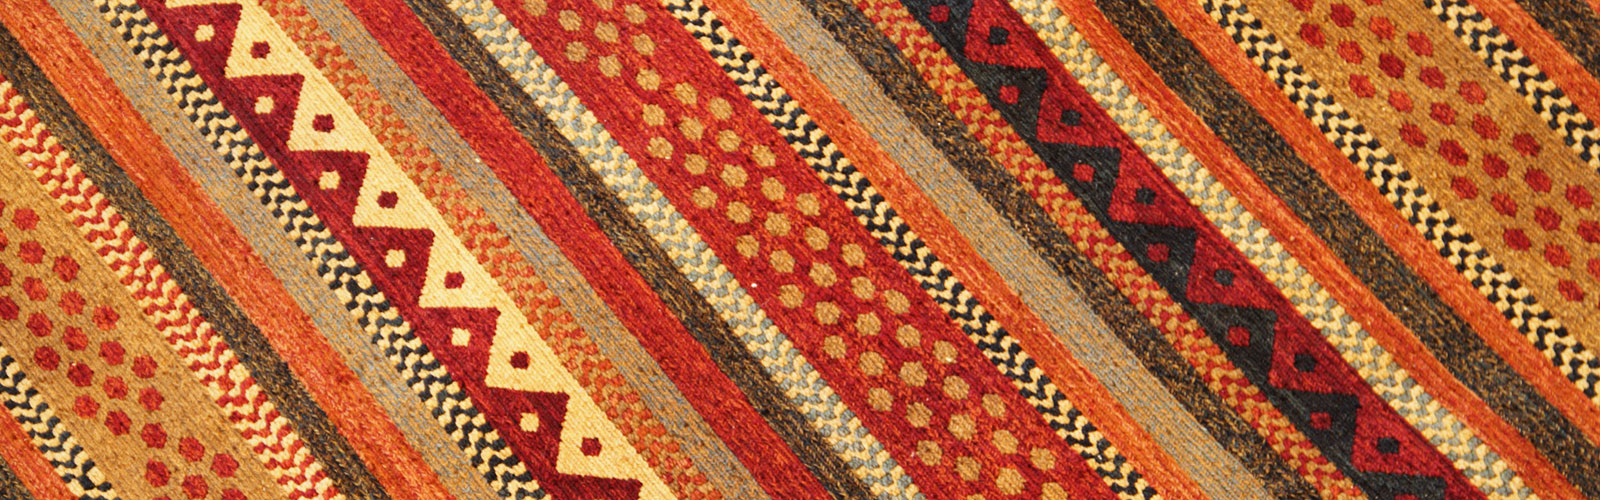 orange brown and gold woven tapestry